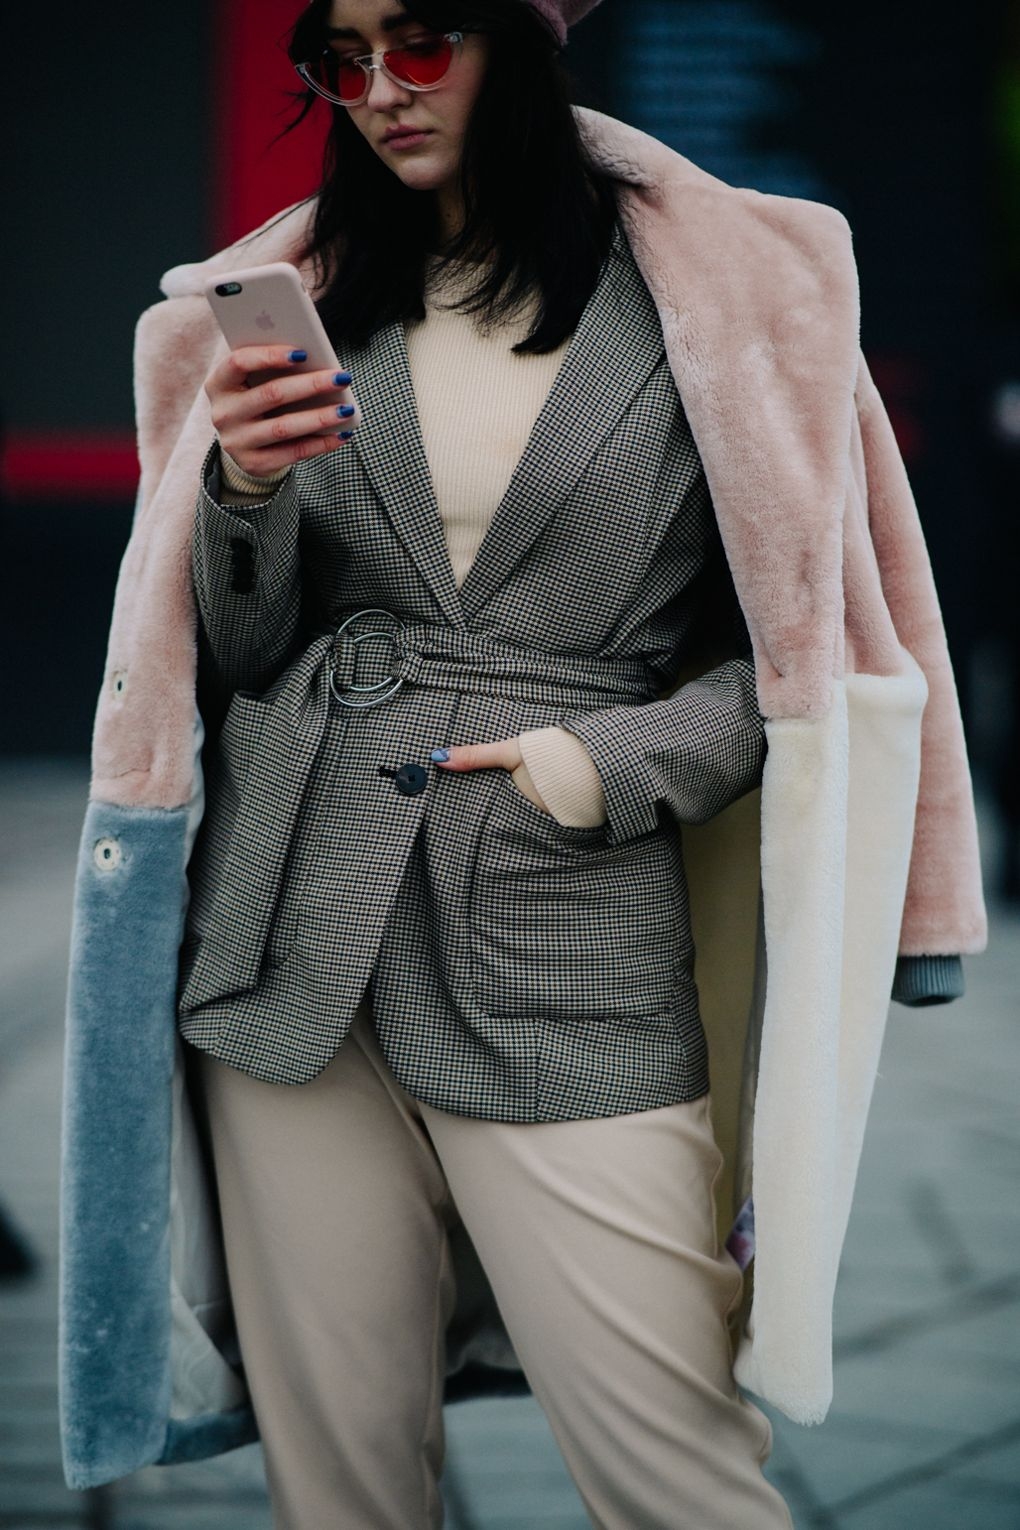 Presents The Best Street Style Looks From Russia Fashion Week!